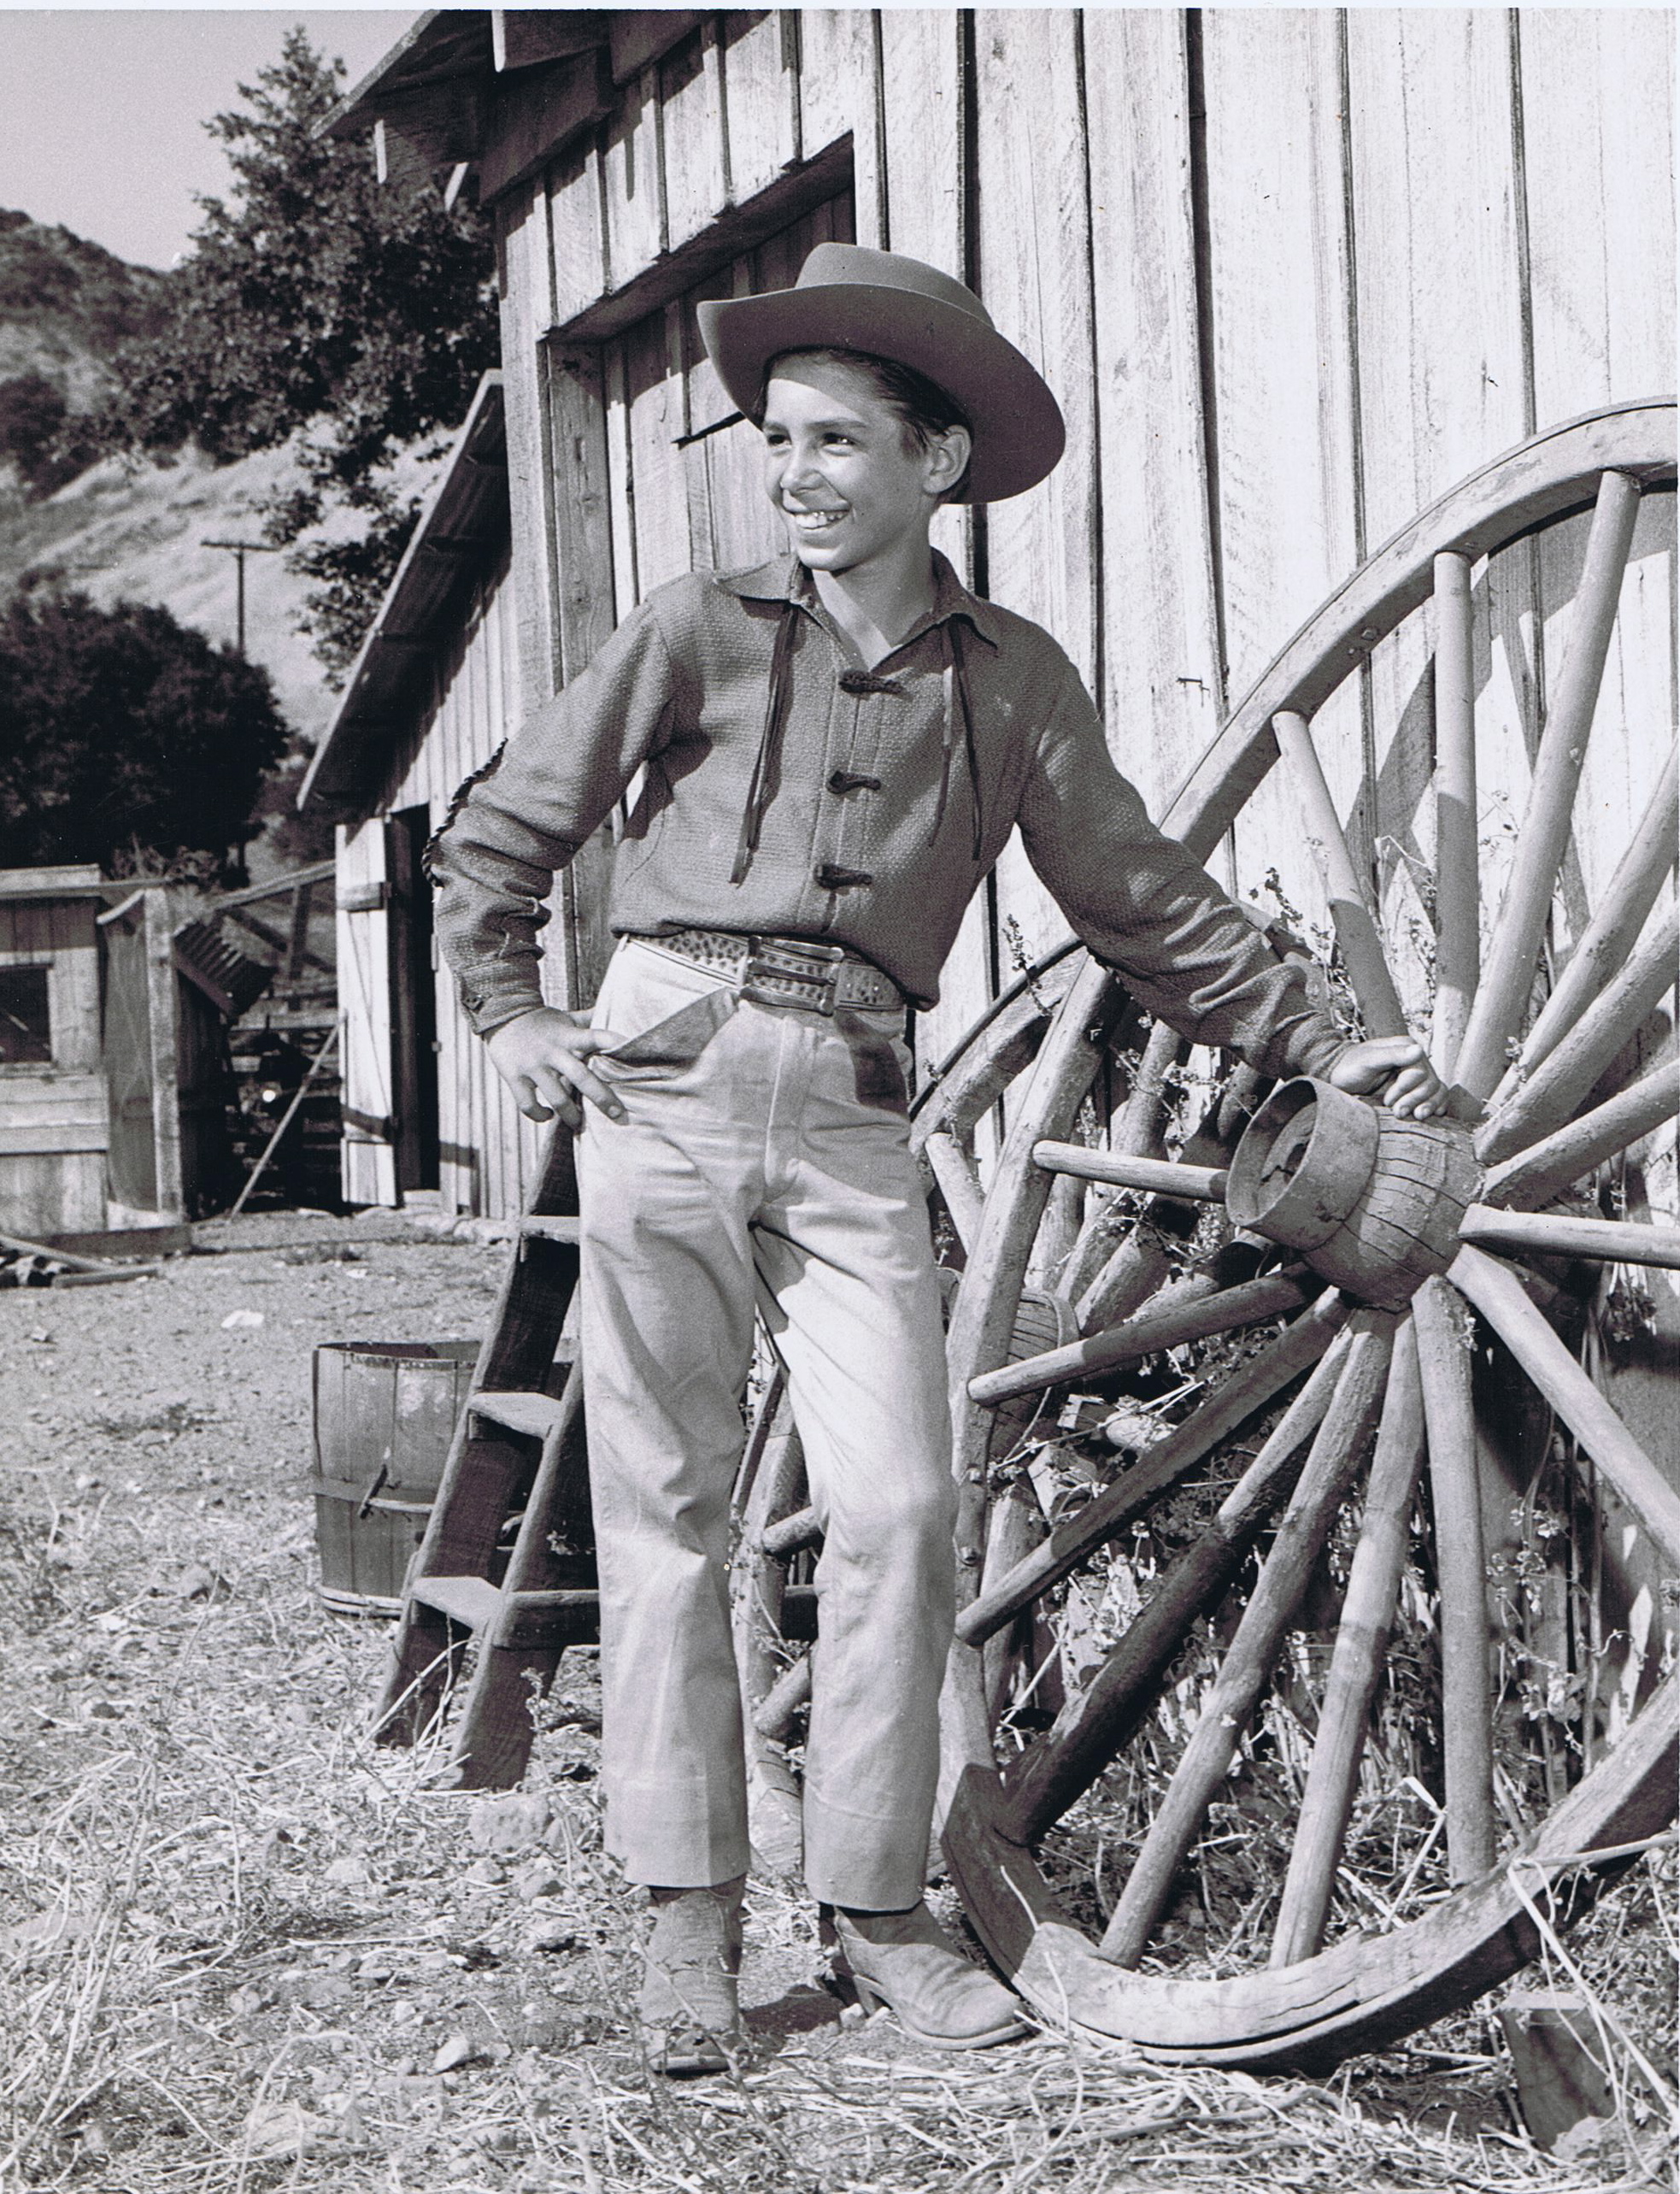 The Rifleman: Johnny Crawford at the 20th Century Fox Ranch, known today as Malibu Creek State Park, 1958